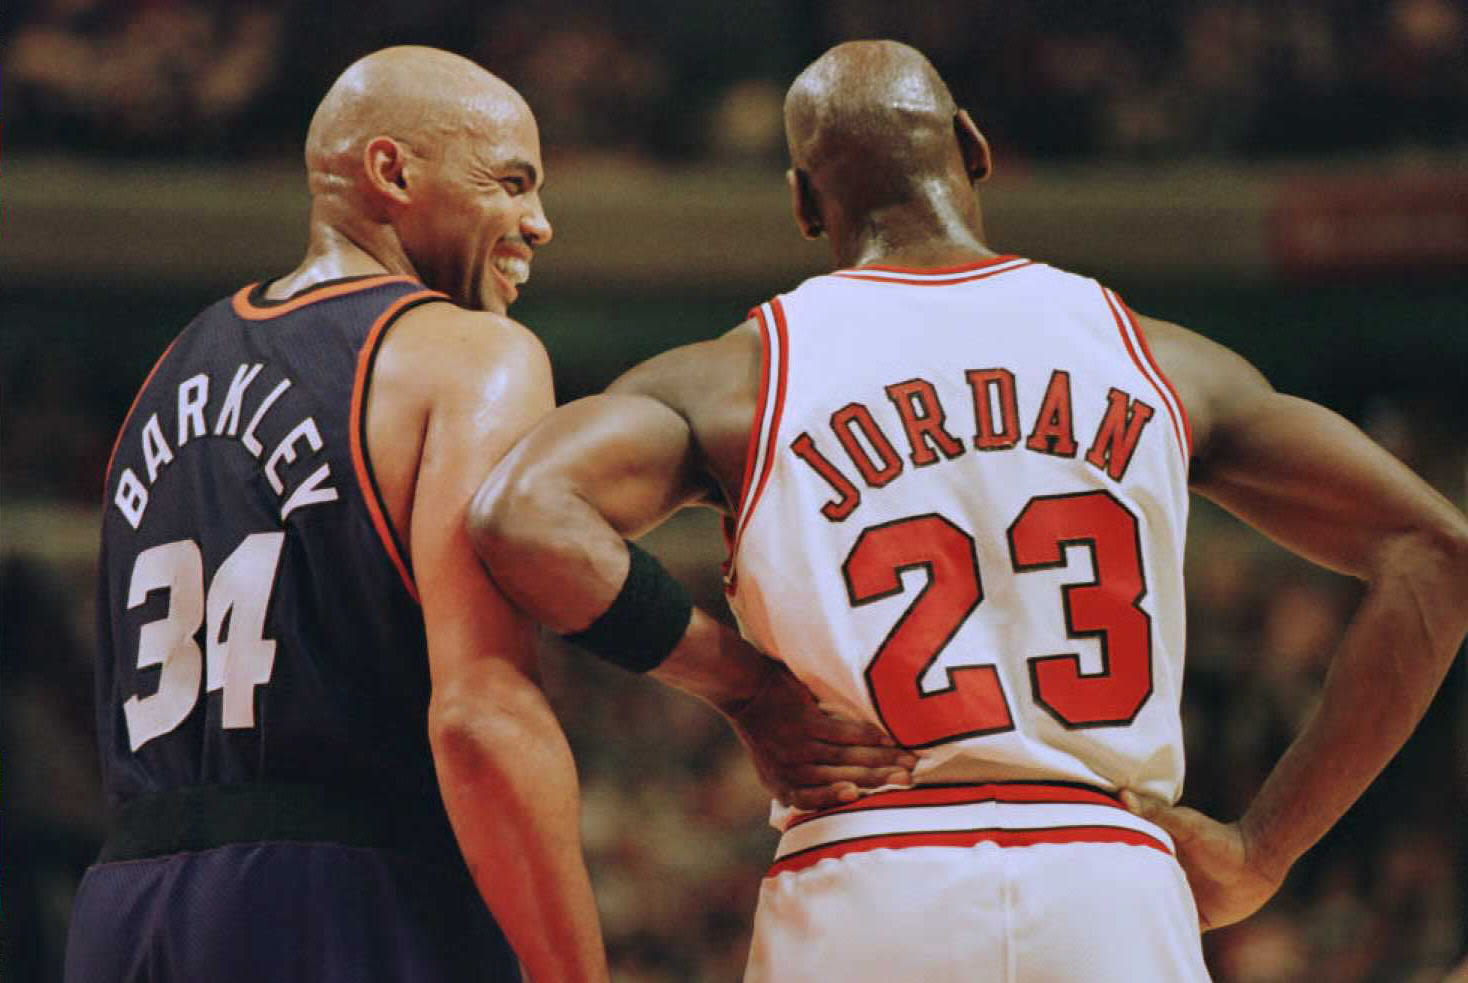 Charles Barkley shares his side of the story of Michael Jordan leaving Isiah Thomas off the Dream Team